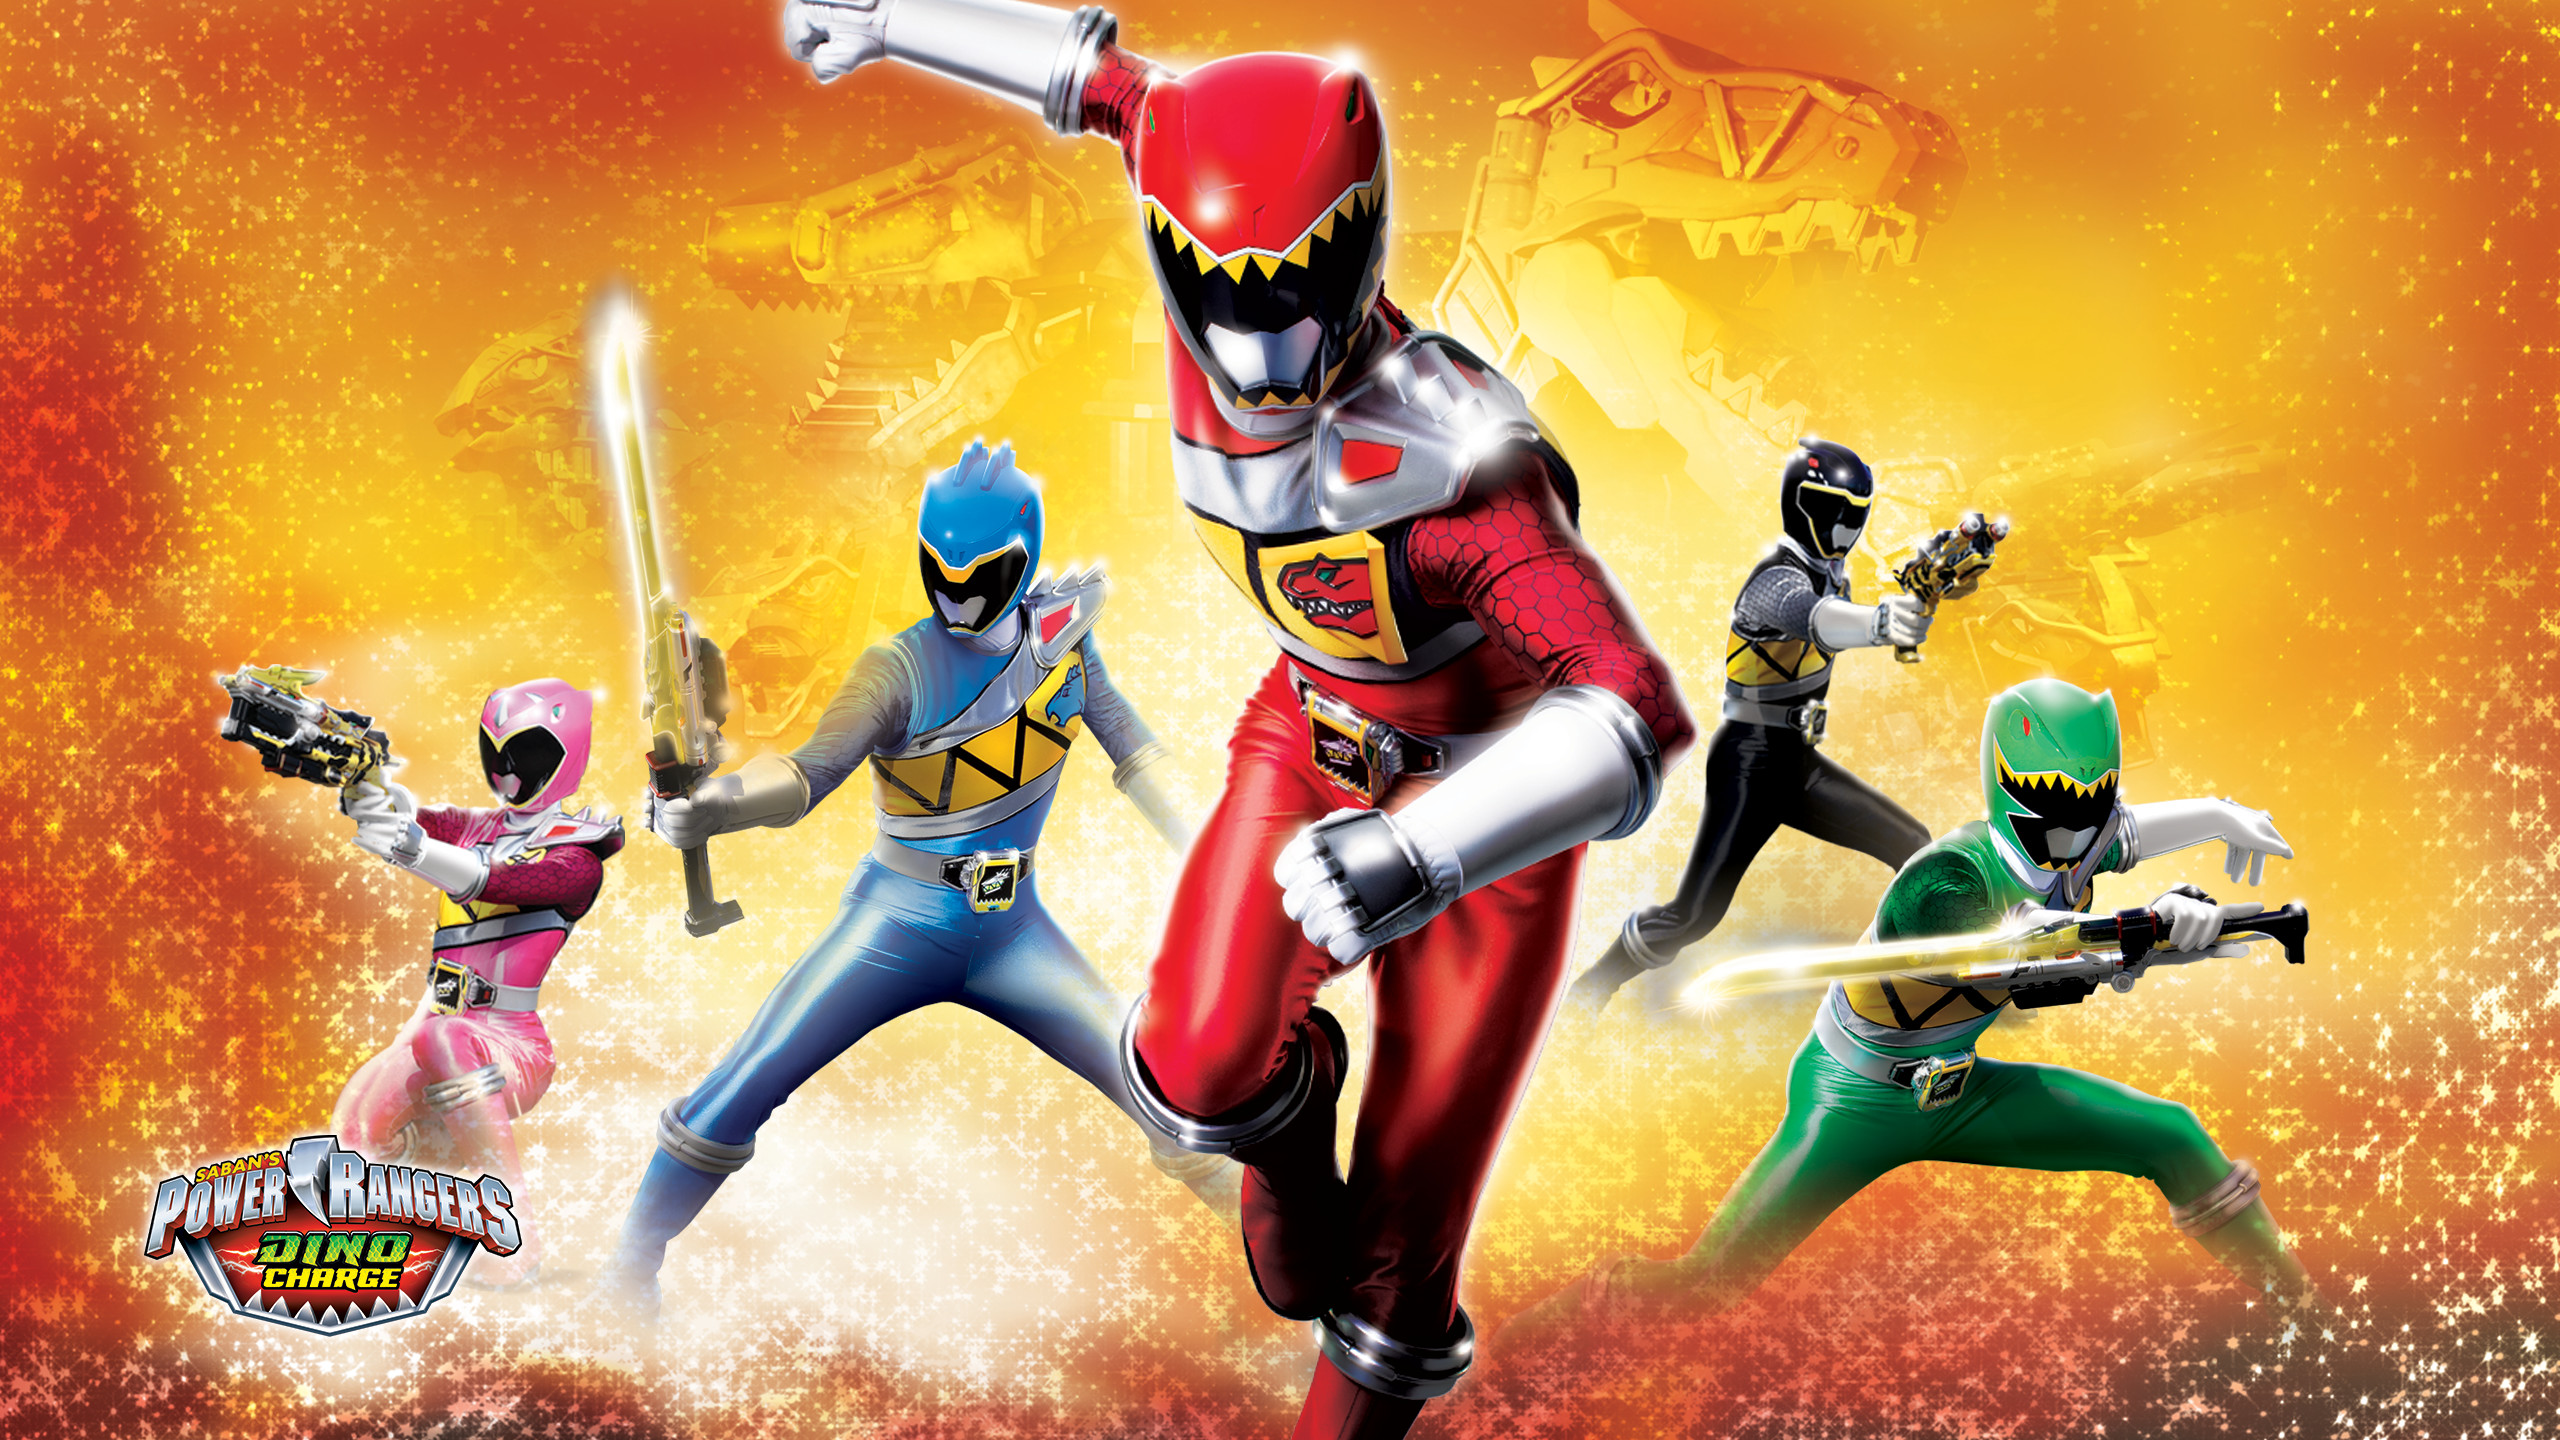 2560x1440 Charge Wallpaper - Power Rangers - The Official Power Rangers Website .